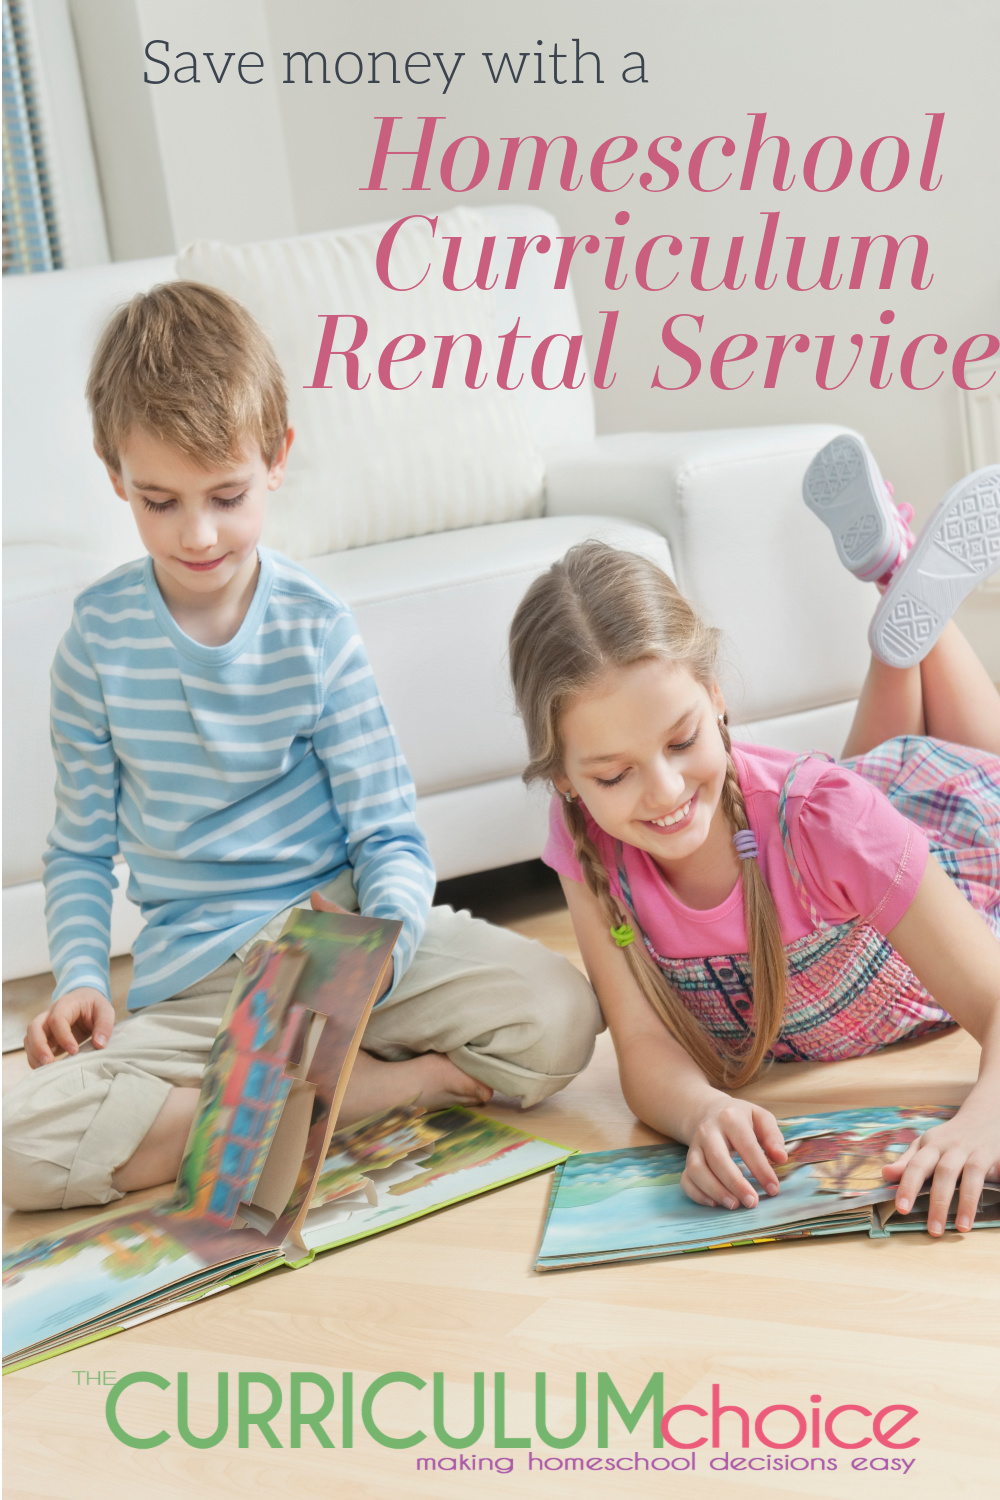 Homeschool Curriculum Rental Service is a great way to cut curriculum expenses! AND Yellow House Book Rental is run by a homeschooling family!